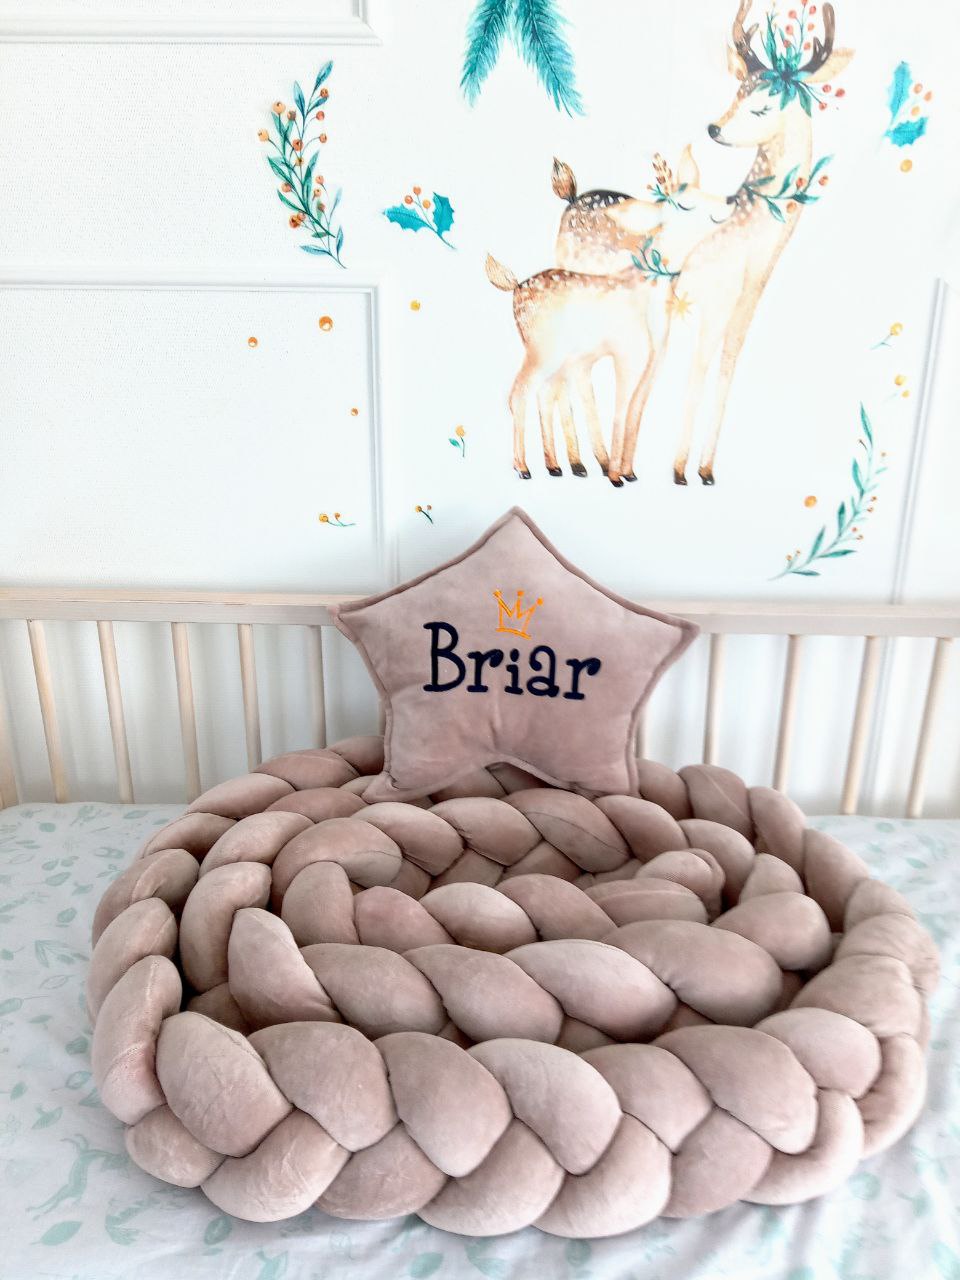 Brown braided bumper for nursery. Star pillow as a gift!